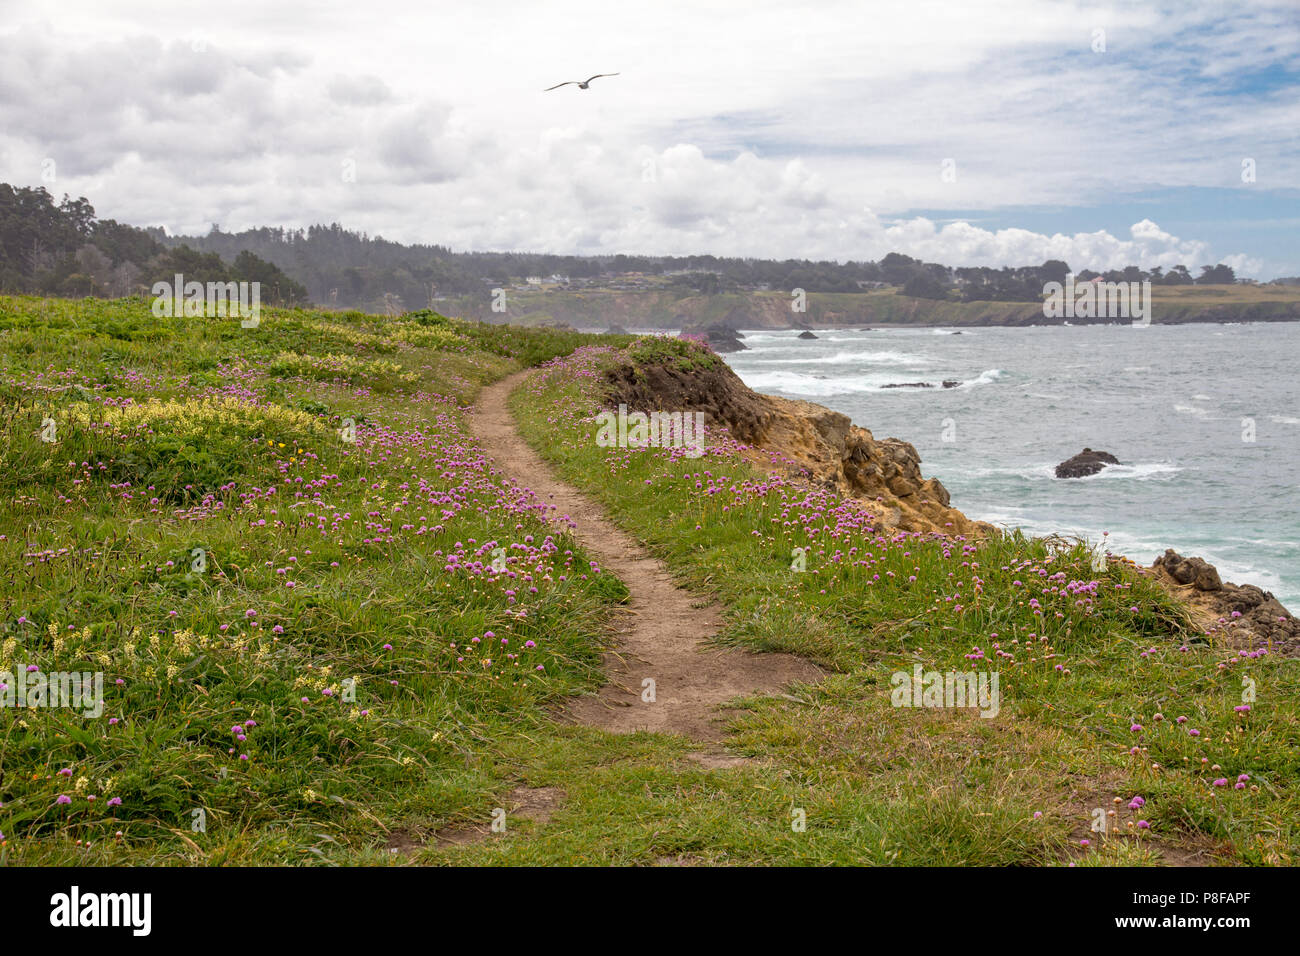 Footpath along low cliffs by Pacific Ocean near Mendocino, California through springtime wildflowers including pink clover. A seagull leads the way... Stock Photo